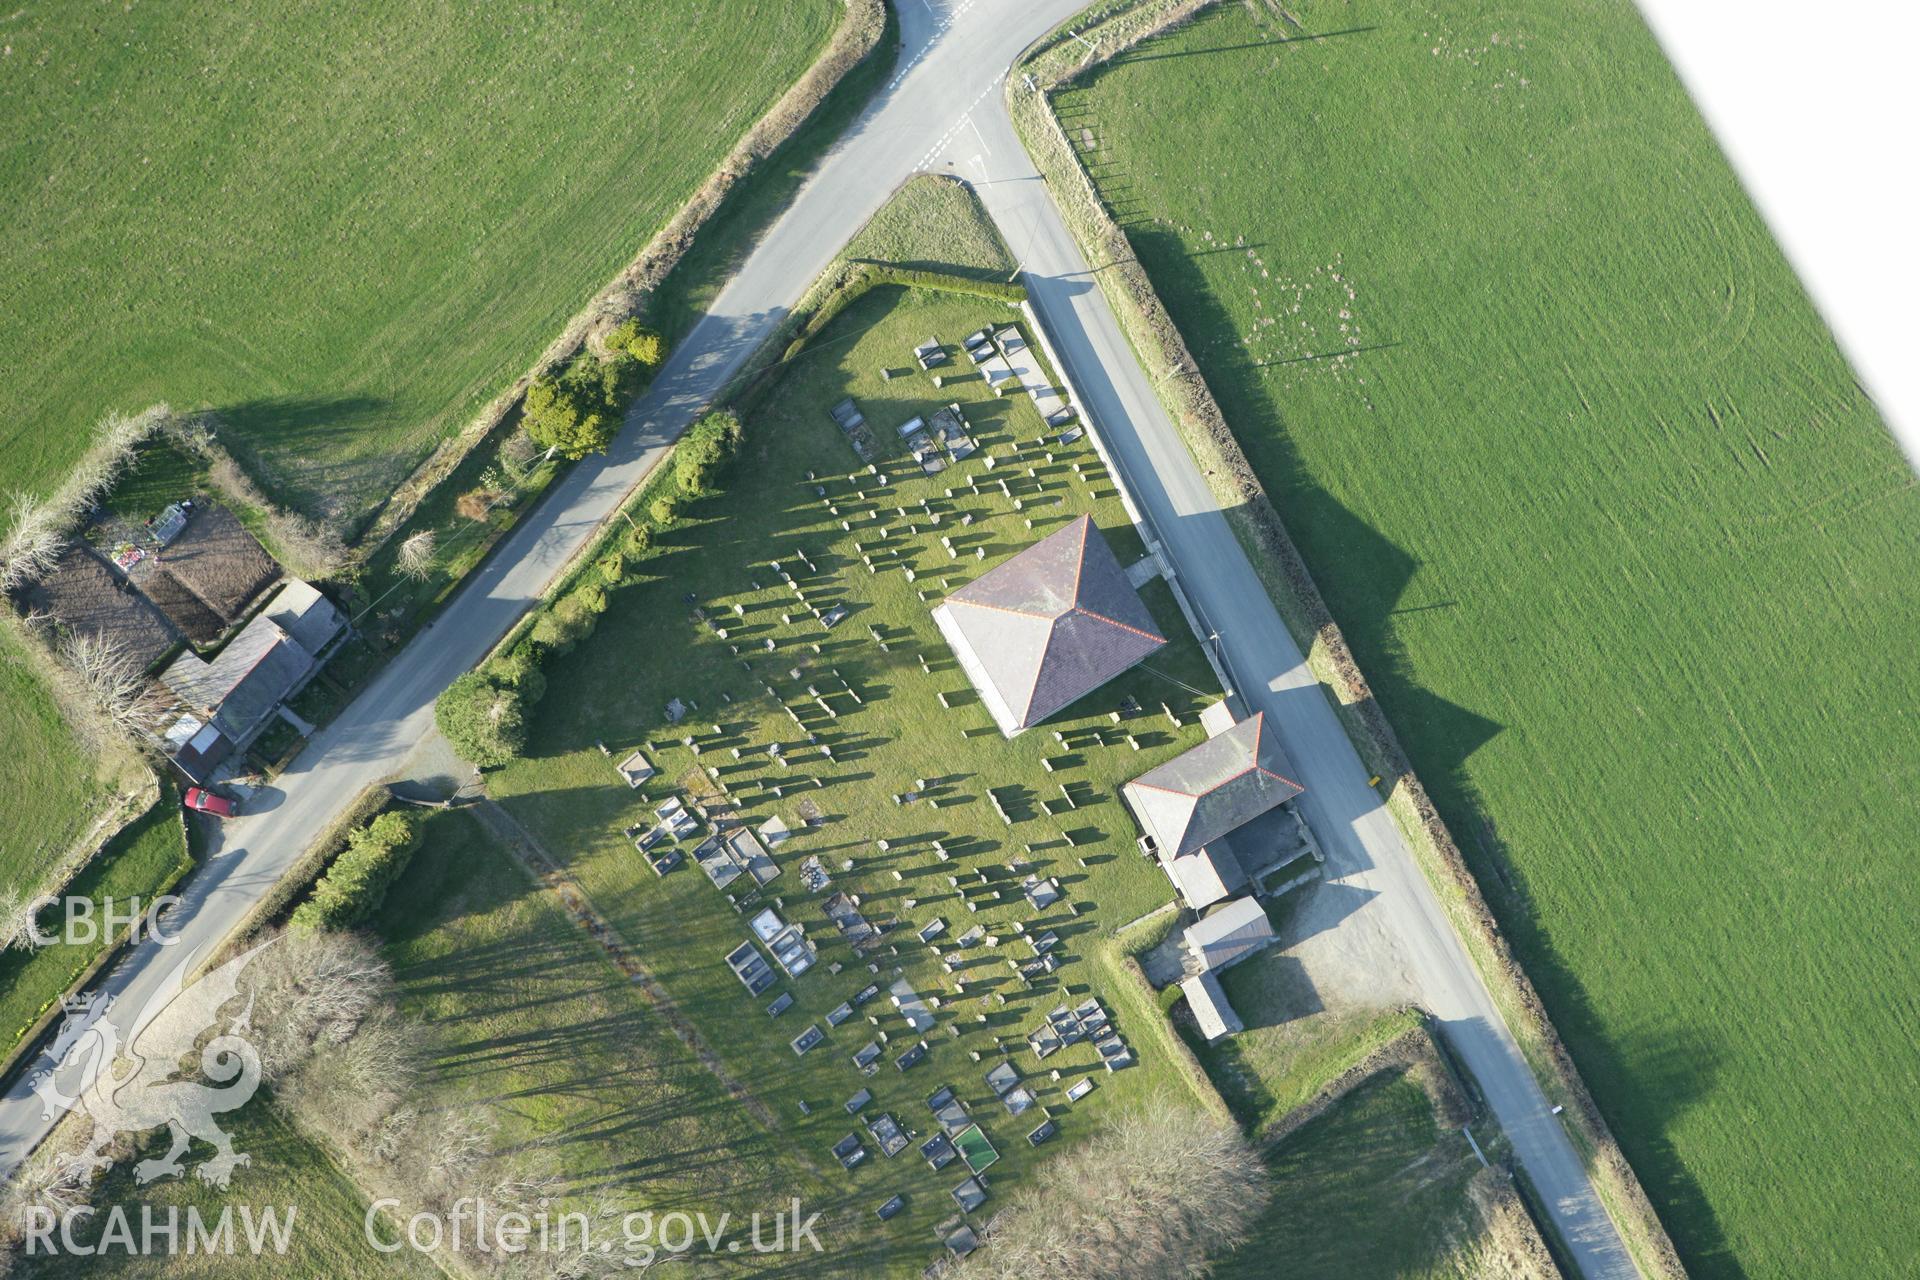 RCAHMW colour oblique aerial photograph of Nebo Independent Chapel, Efail-Wen. Taken on 13 April 2010 by Toby Driver